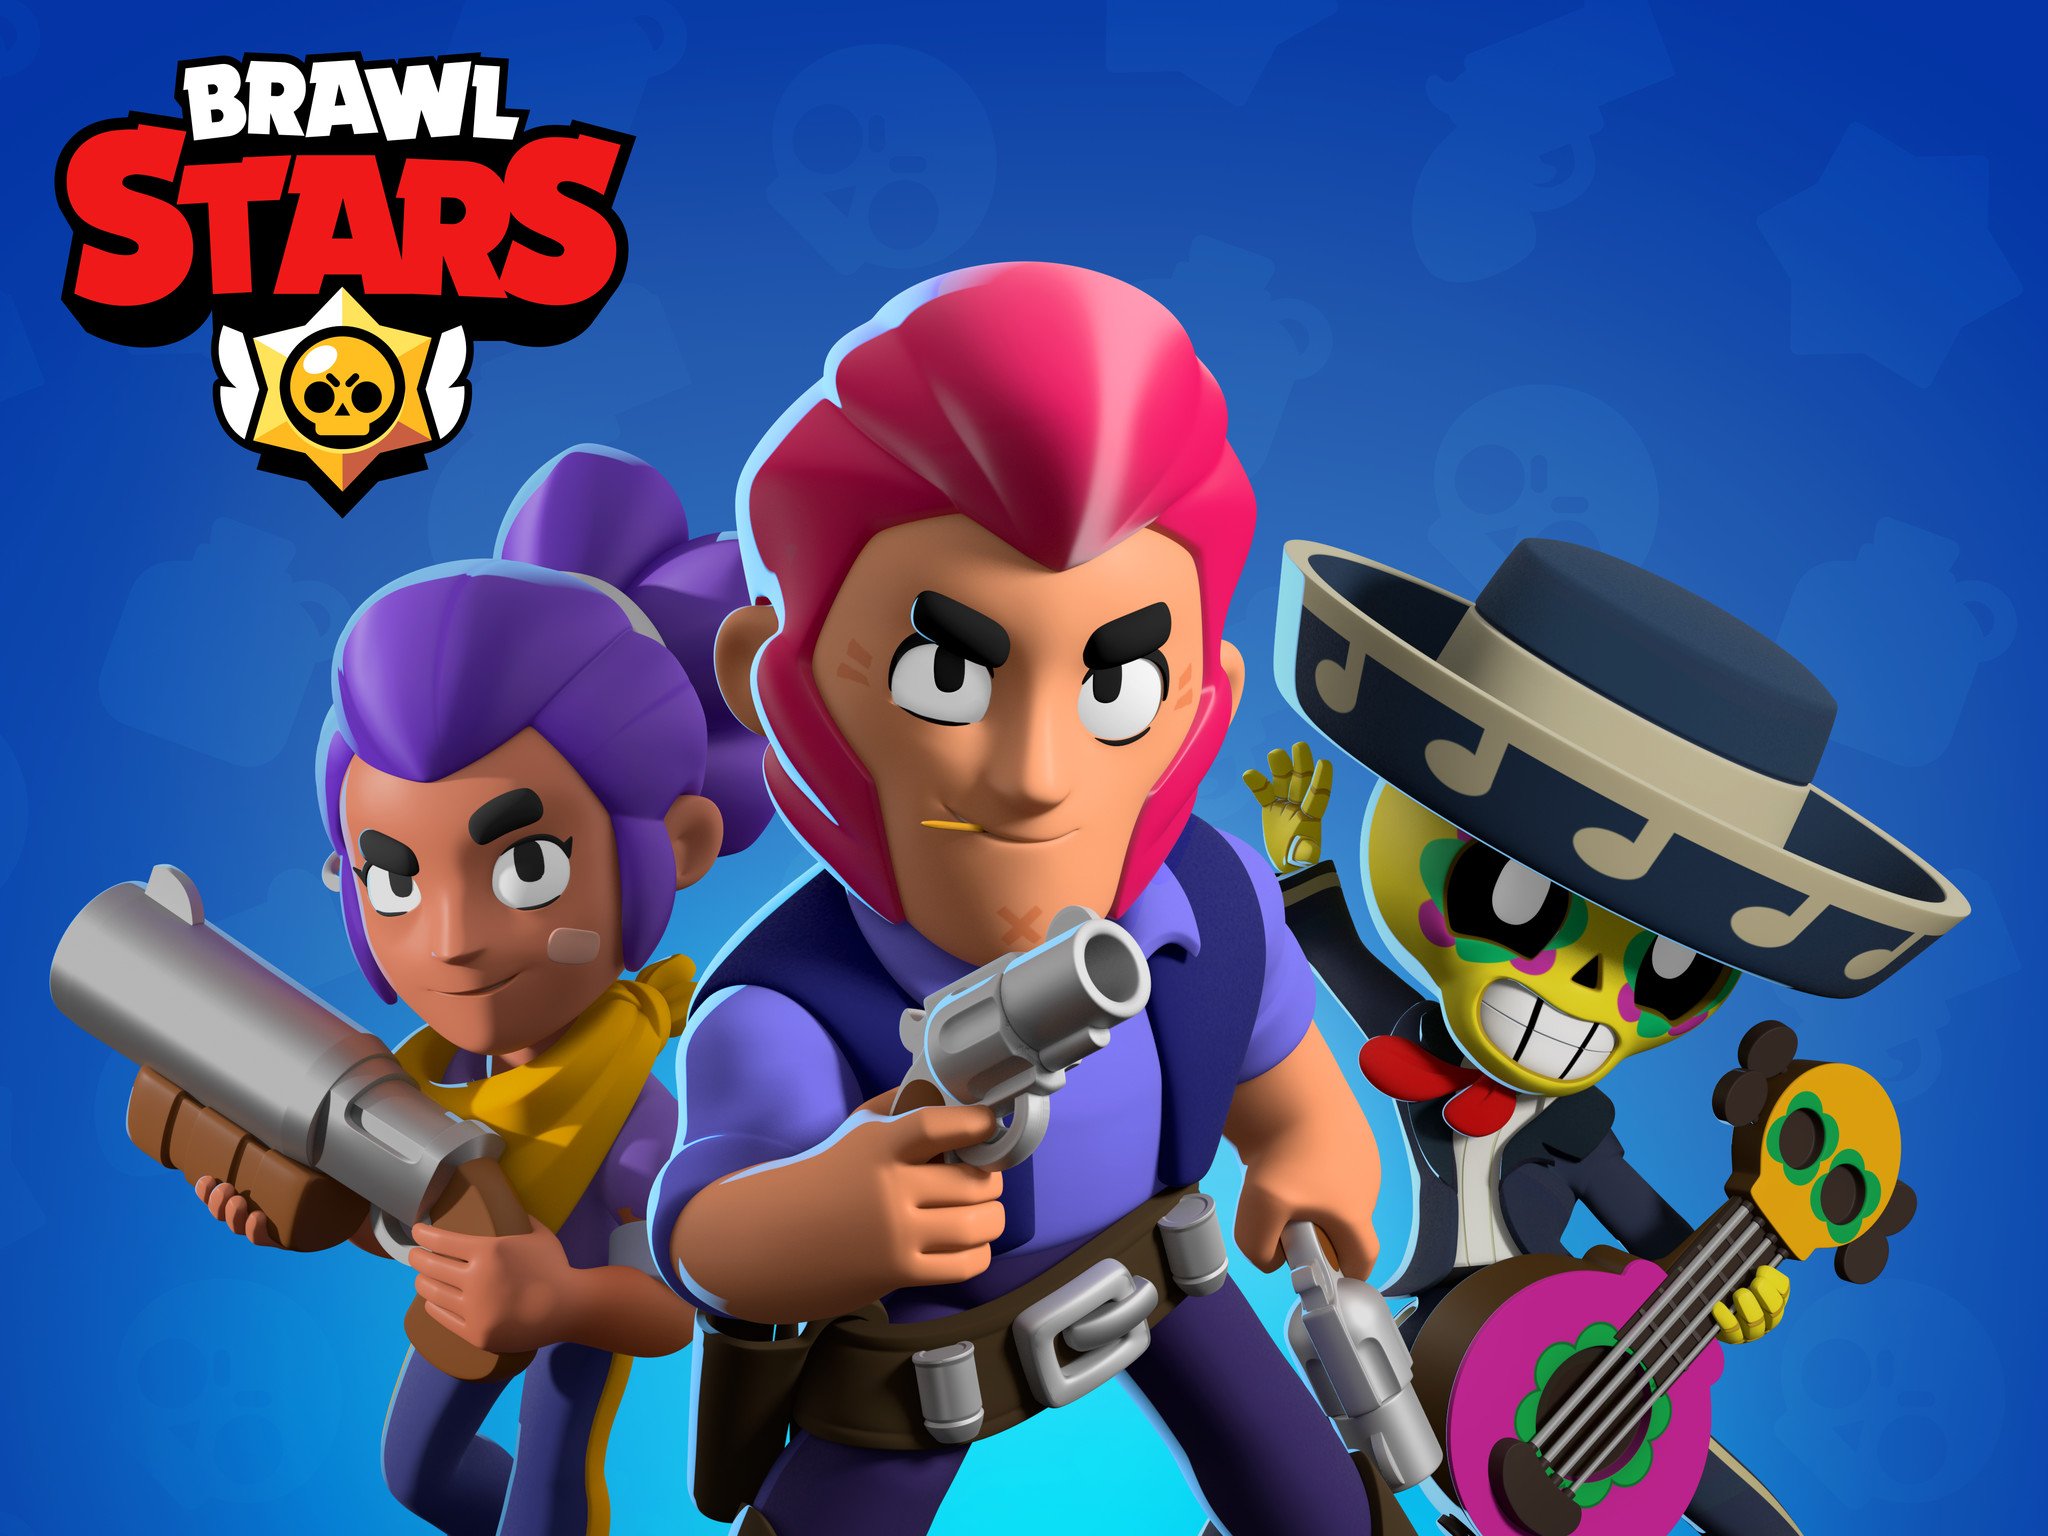 Supercell S Long Awaited Brawl Stars Will Come To Android On December 12 Android Central - supercell brawl stars login